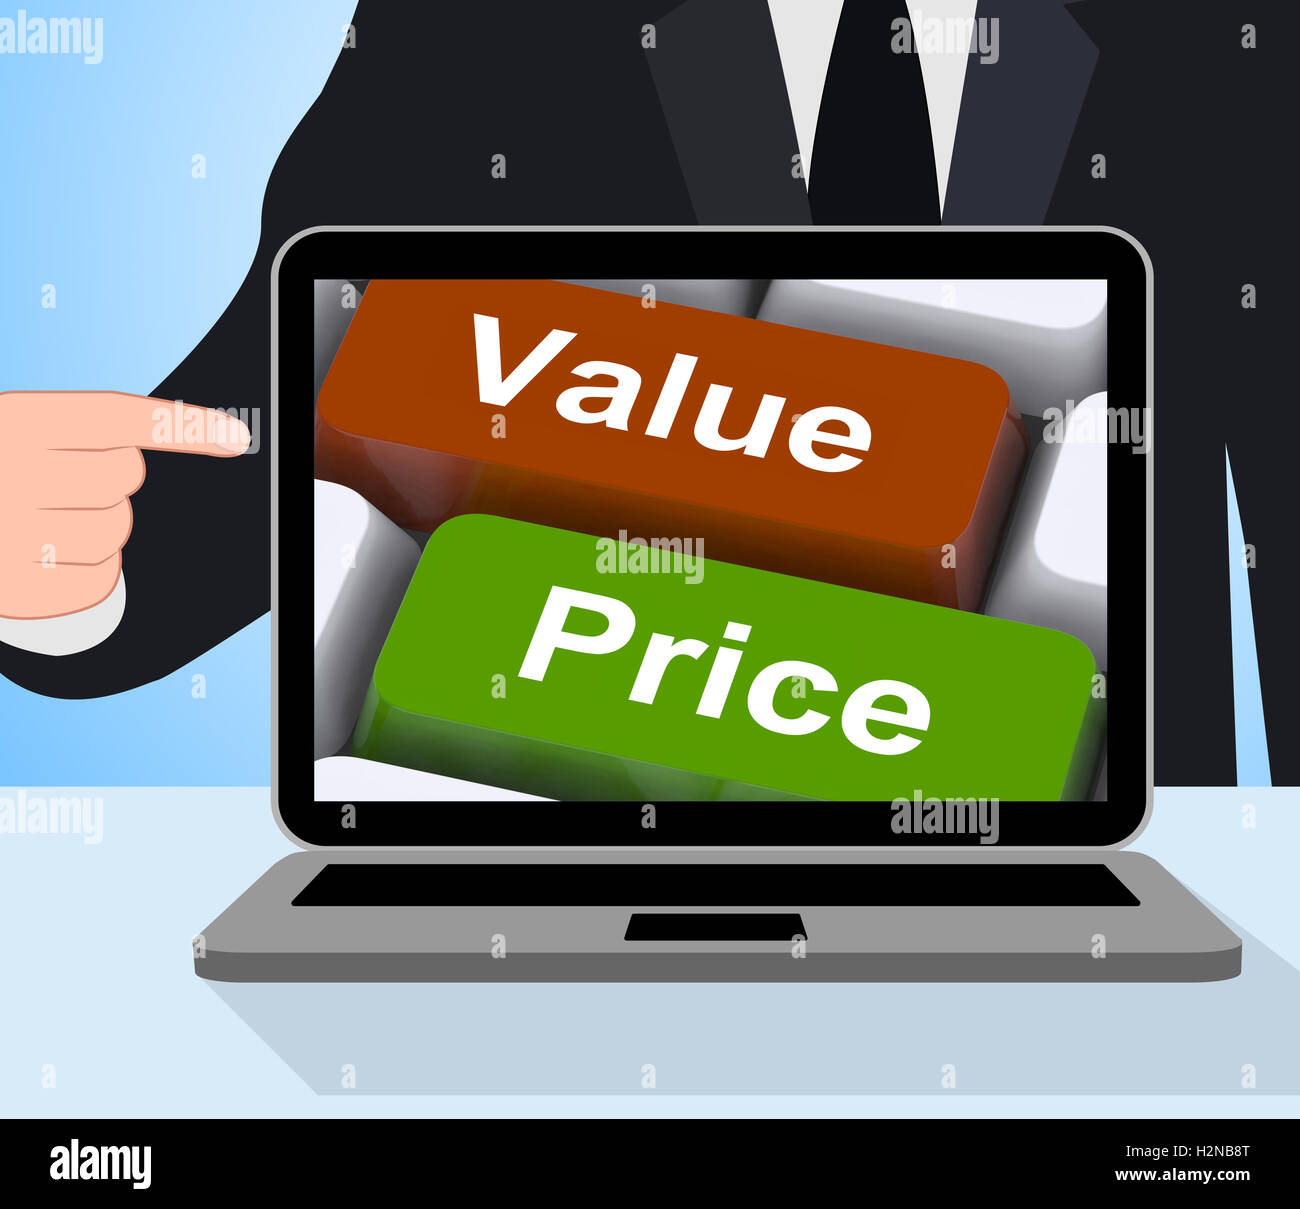 Value Price Computer Meaning Product Quality And Pricing Stock Photo - Alamy